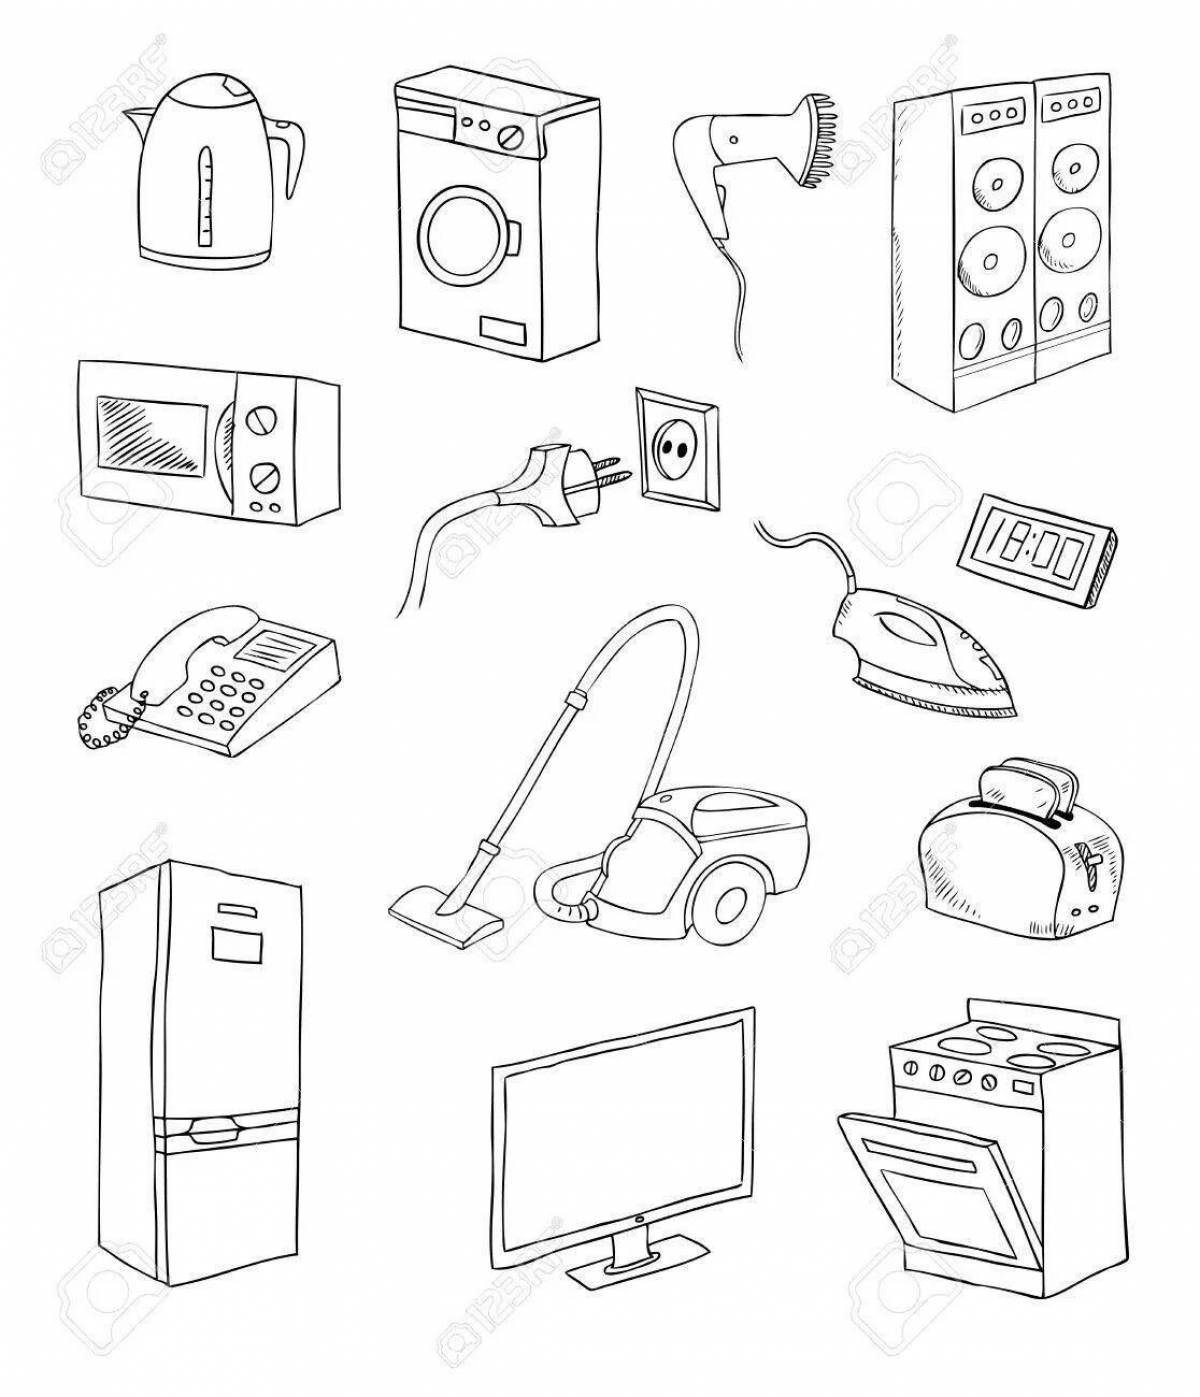 Cute home appliances coloring book for students